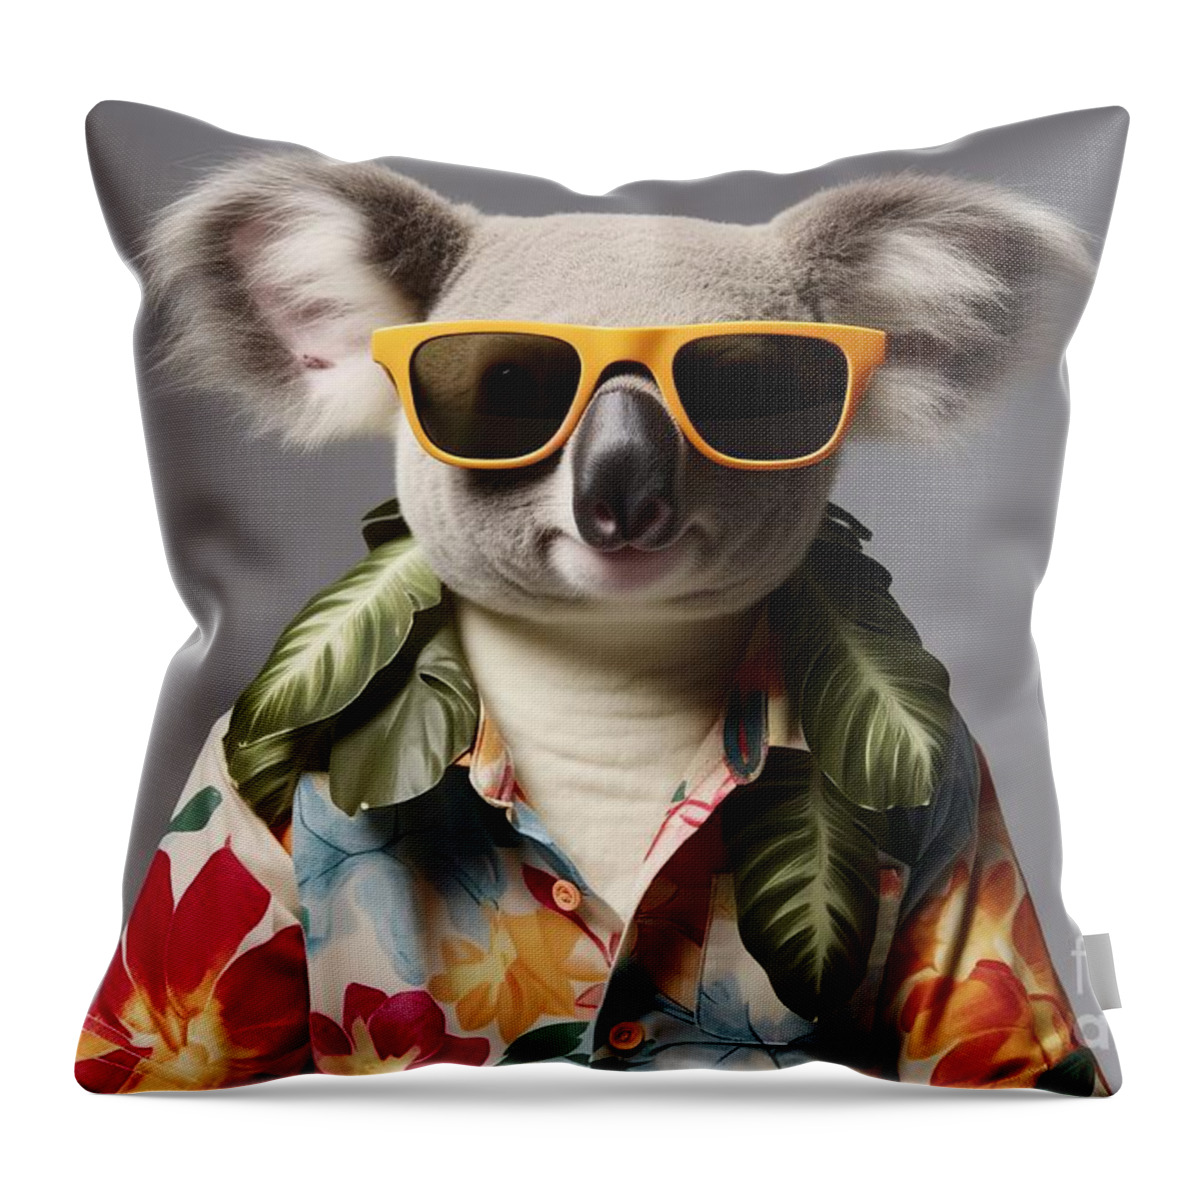 Carnival Throw Pillow featuring the painting Background Grey Collar Flower Head It's Leaves Sunglasses Shirt Hawaiian Wearing Koala Carnival Mask Face Venice Costume Italy Party Red Fun Masquerade White Person Female Joy H Ai Dog Animal by N Akkash